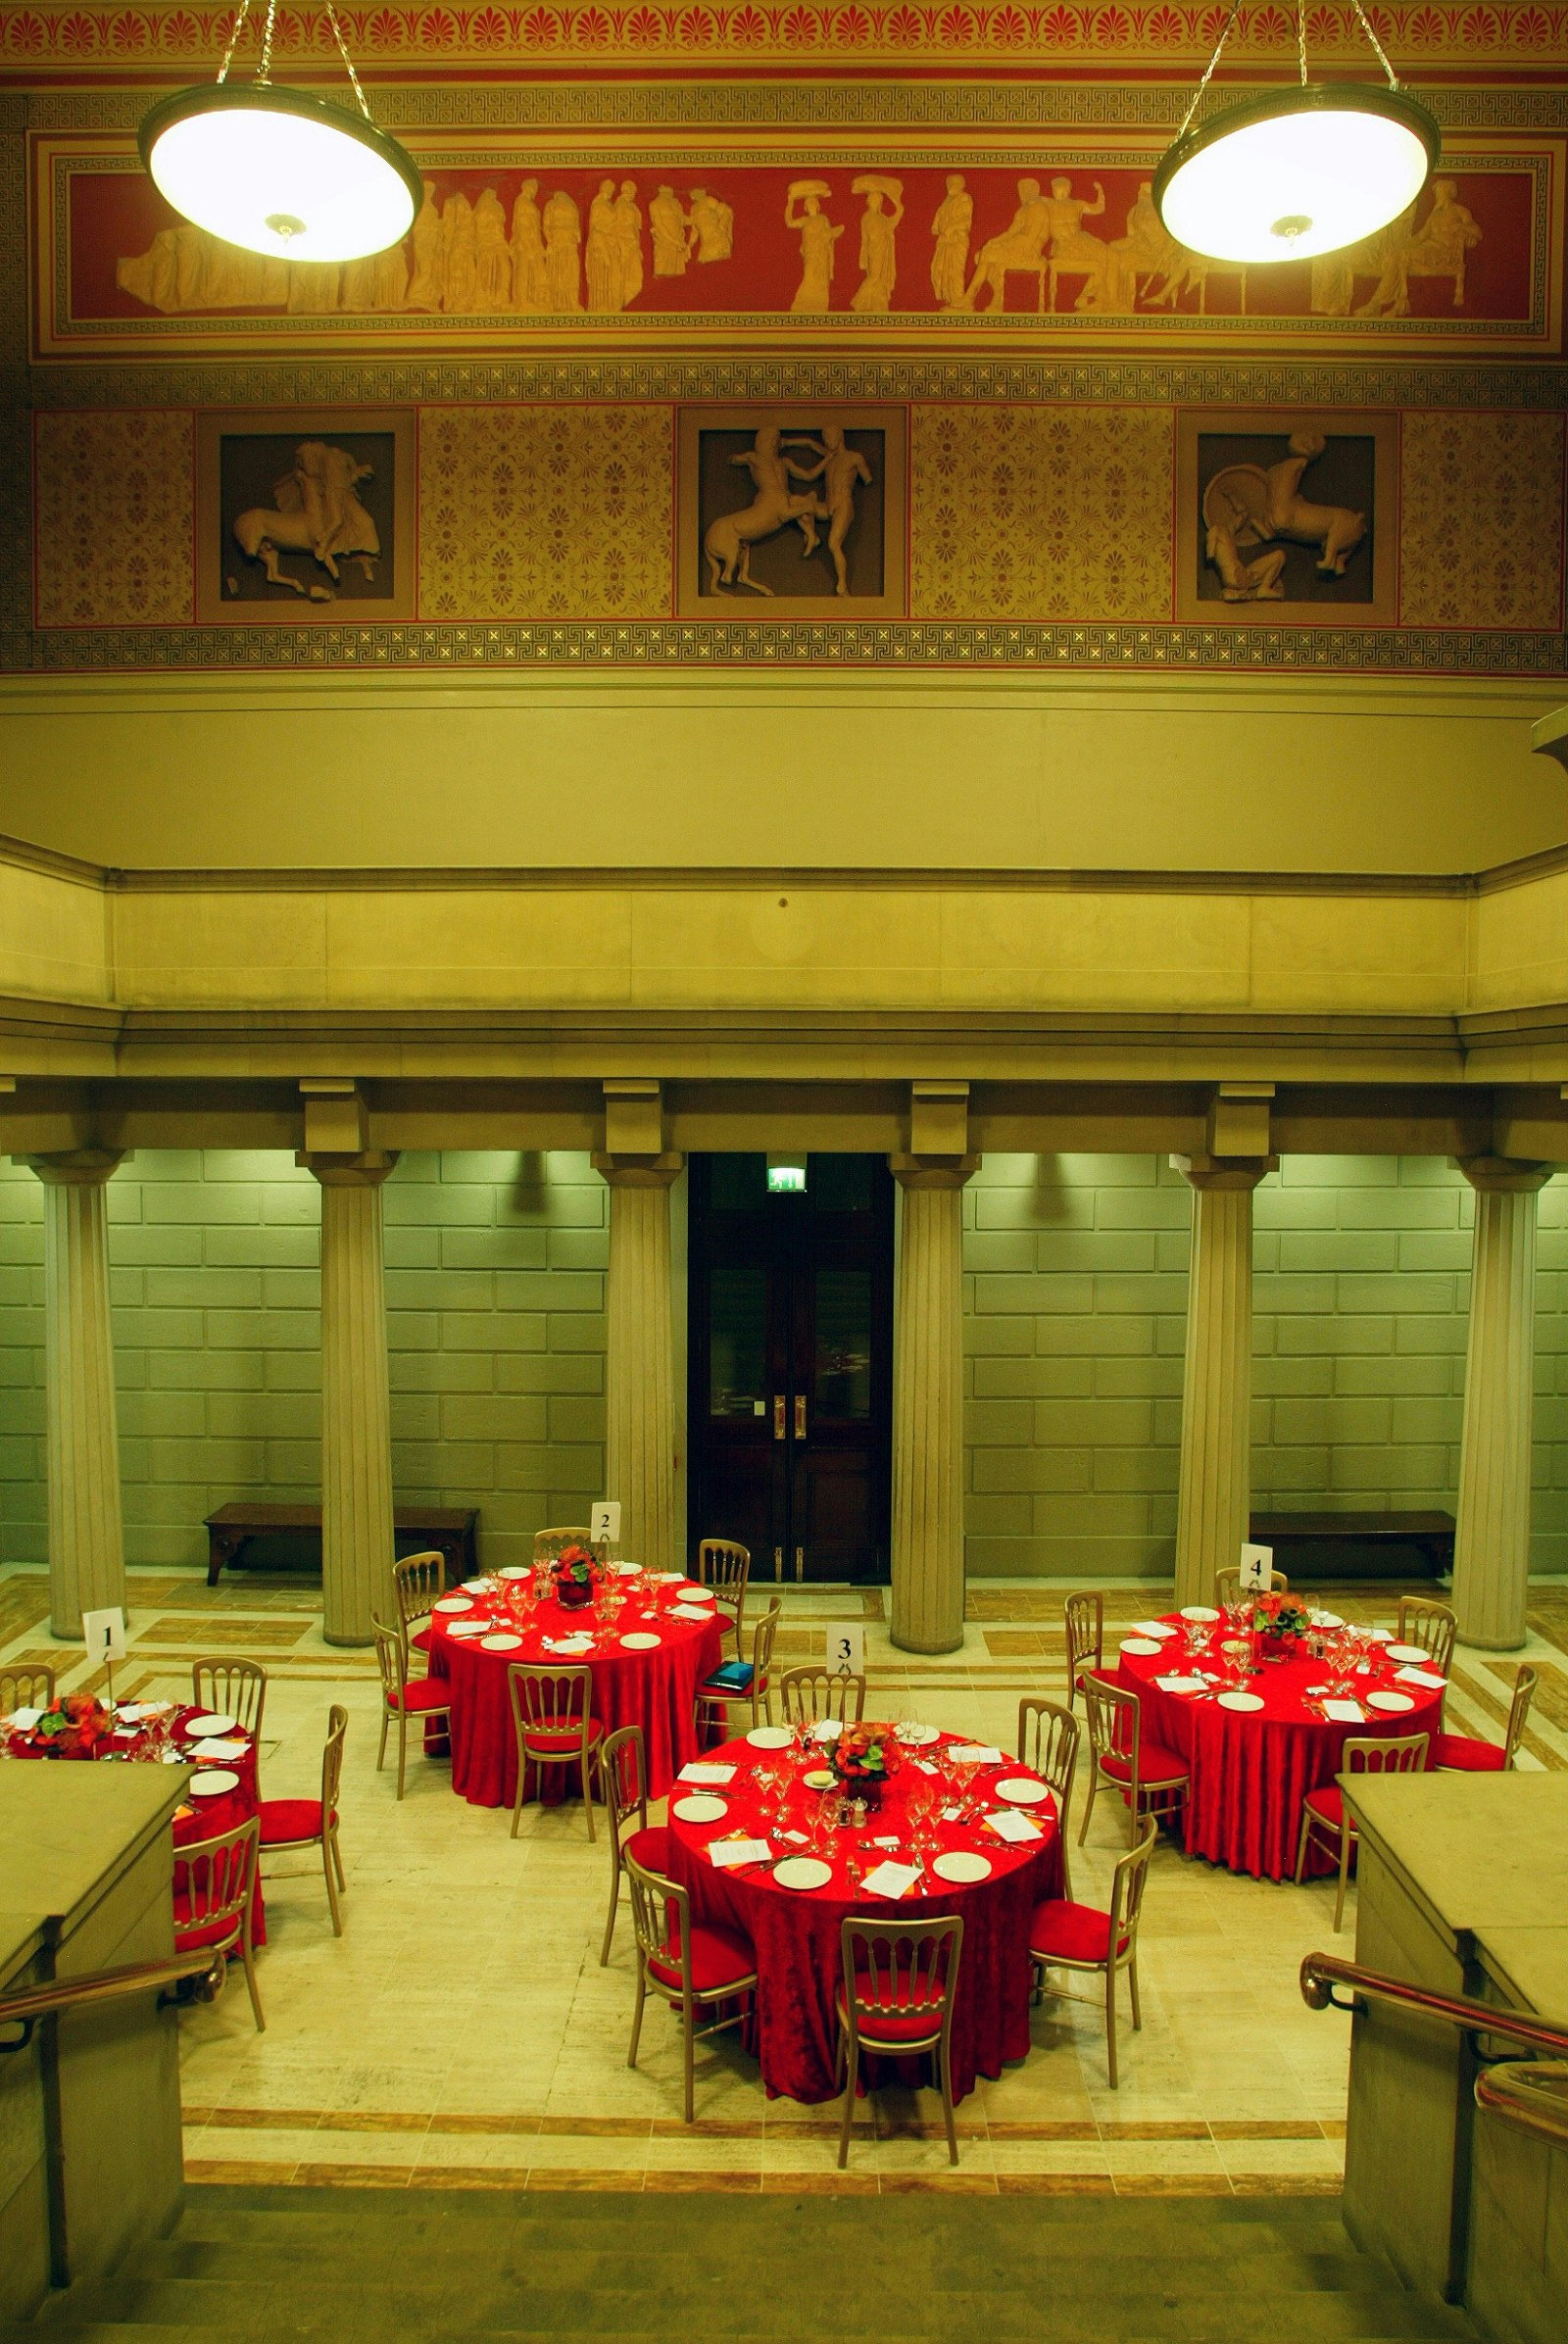 Manchester Art Gallery - Victorian Hall image 2